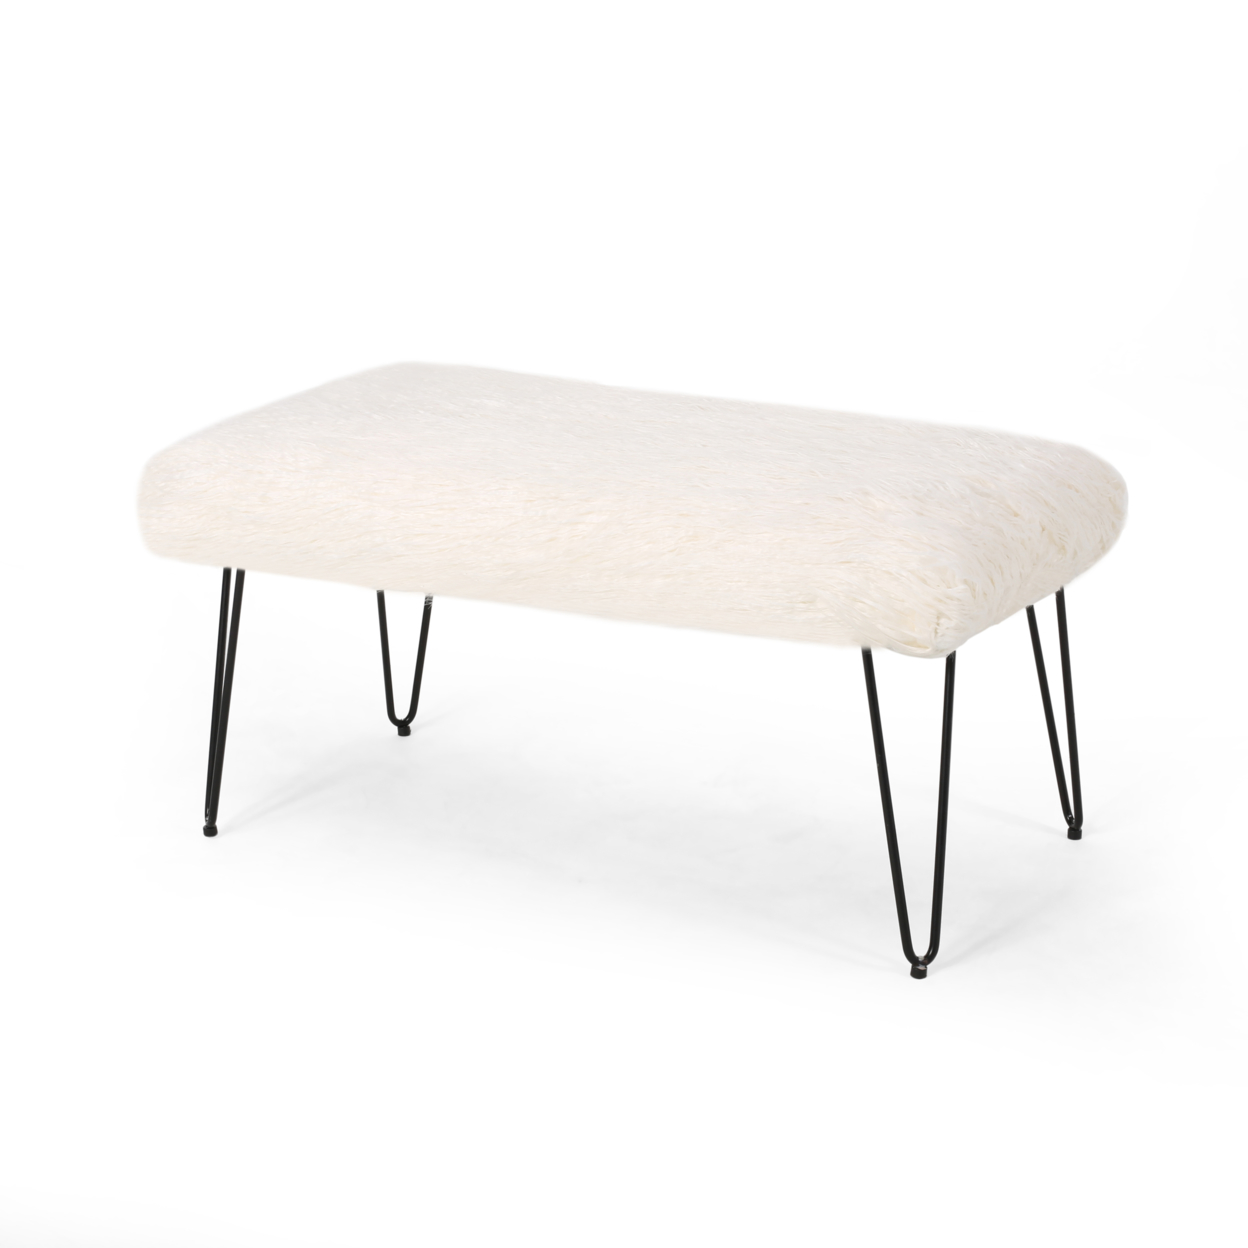 Louise Faux Fur Bench With Hairpin Legs - White + Black Finish